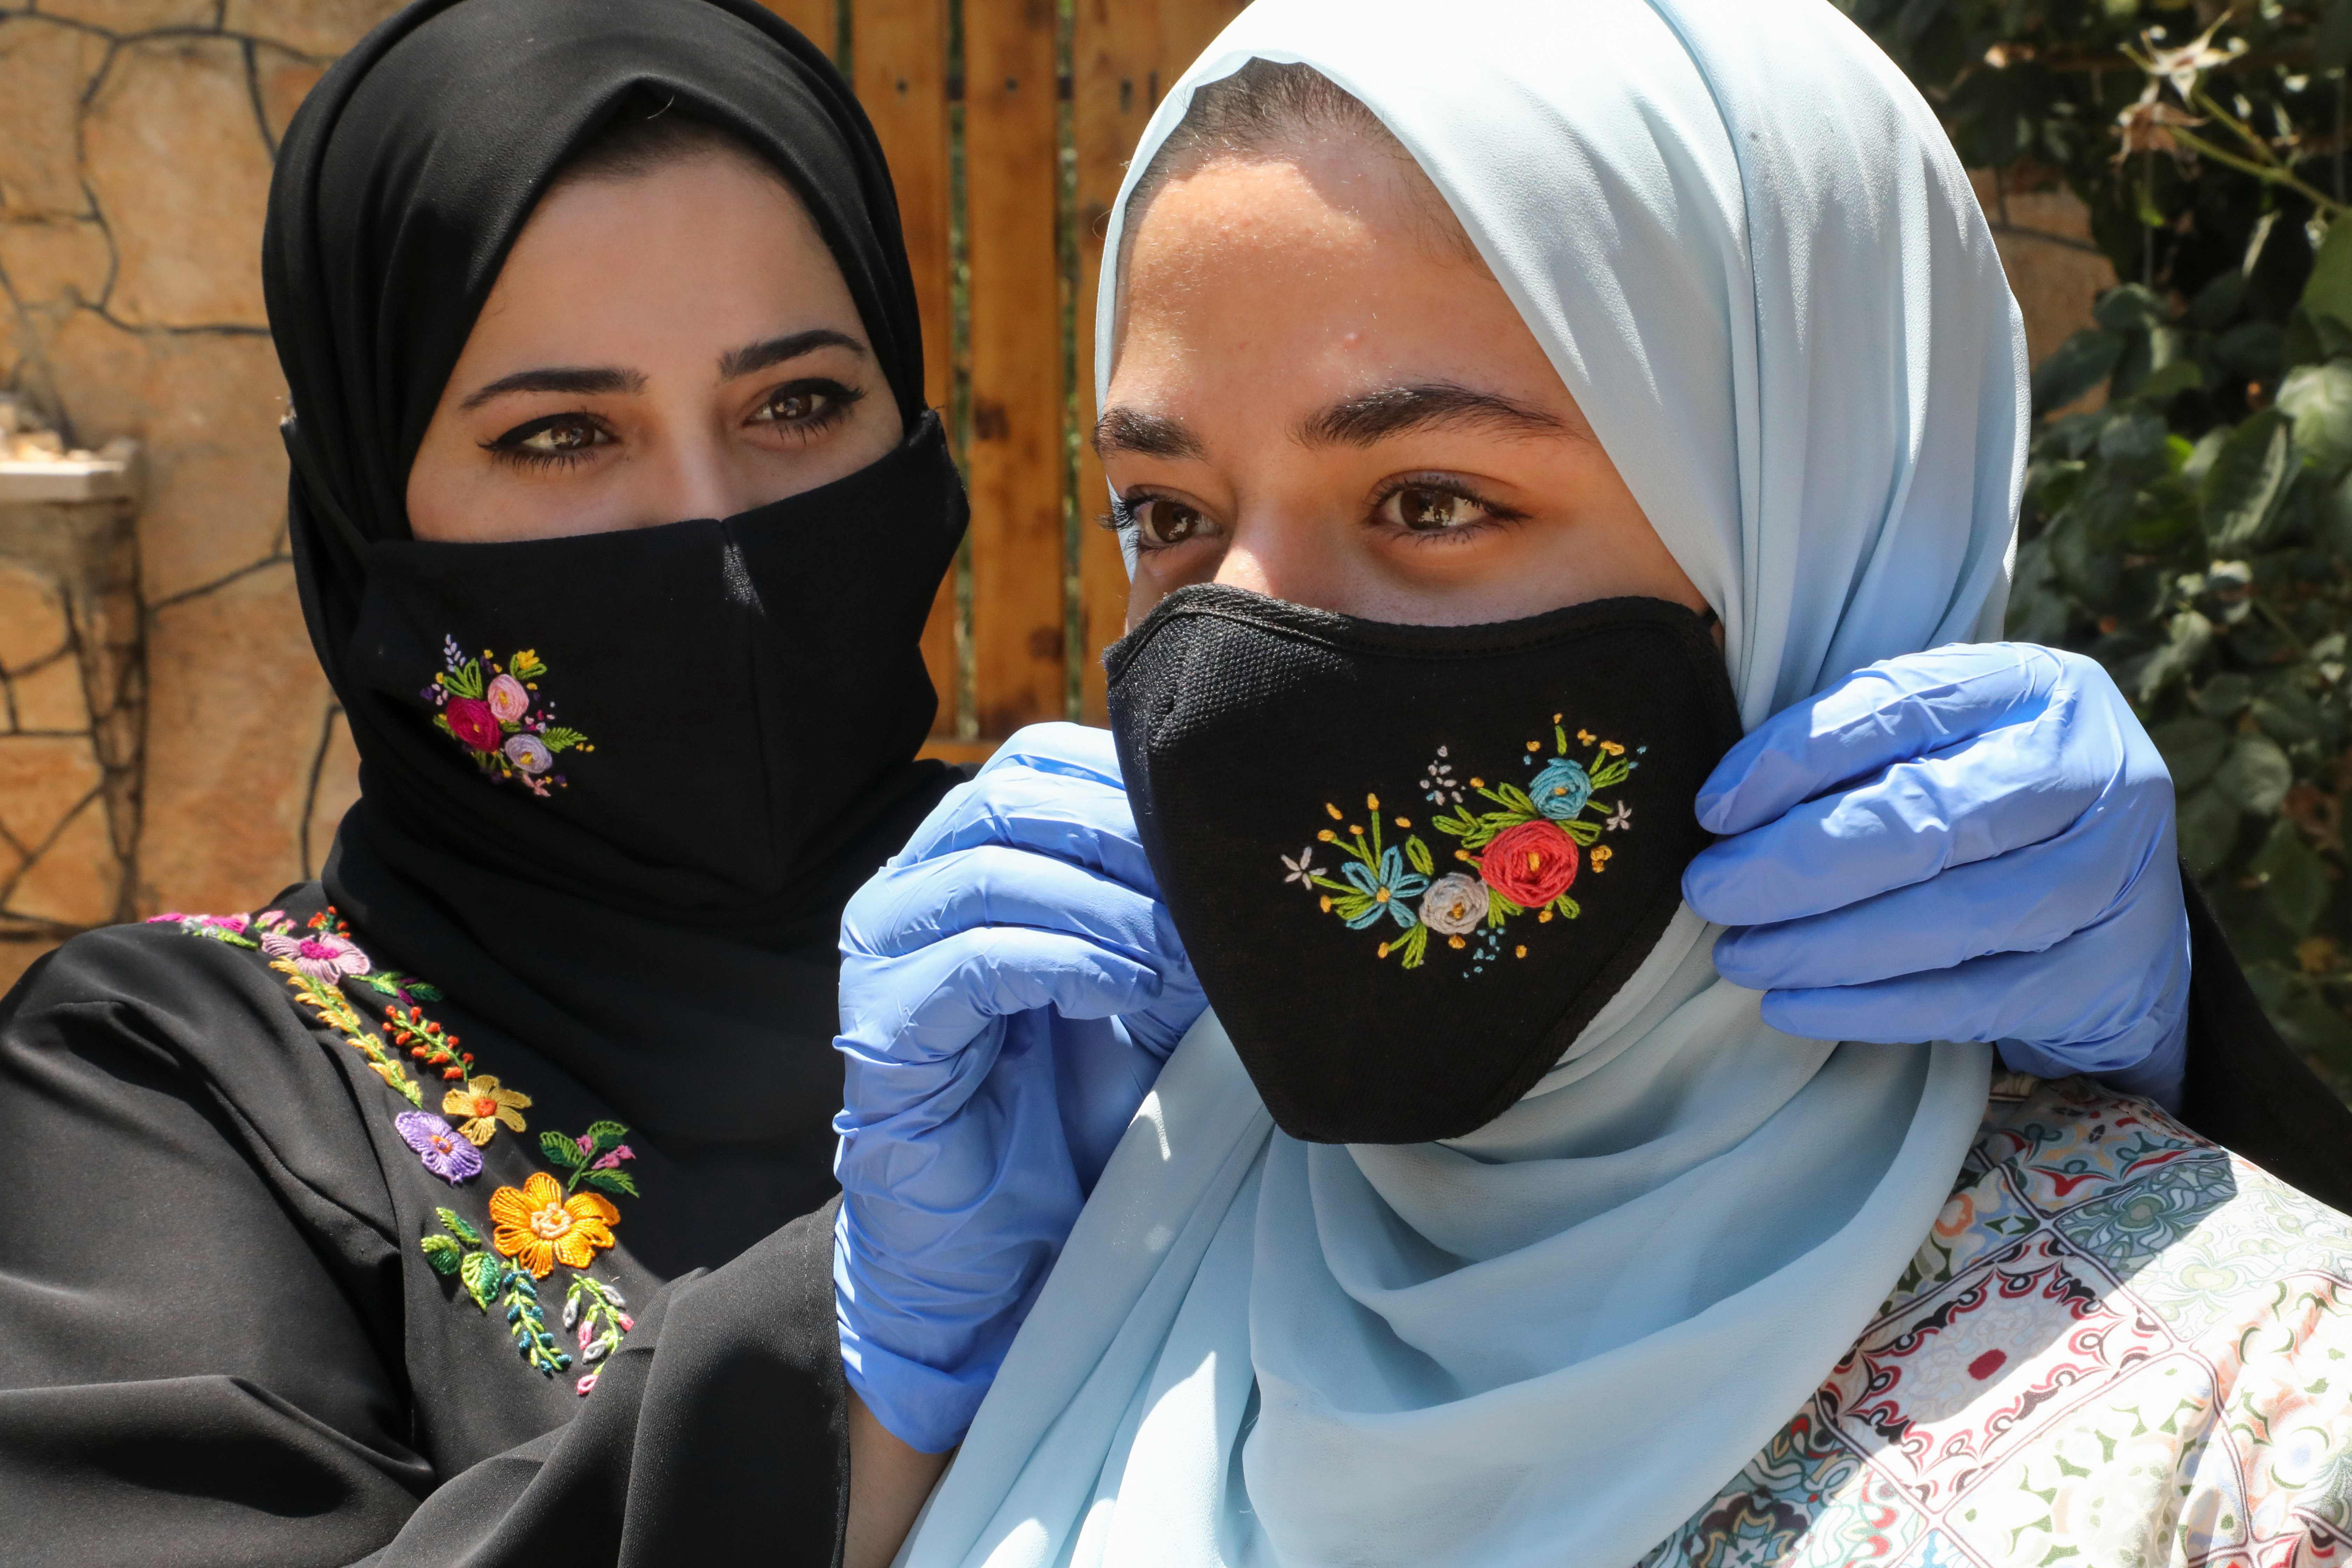 Palestinian Waad Manasra adjusts one of her hand-embroidered protective masks, sold also online, on a customer's face at her home in the village of Bani Naim, east of the West Bank city of Hebron, on July 6, 2020, amid the COVID-19 pandemic. (Photo by HAZEM BADER / AFP)